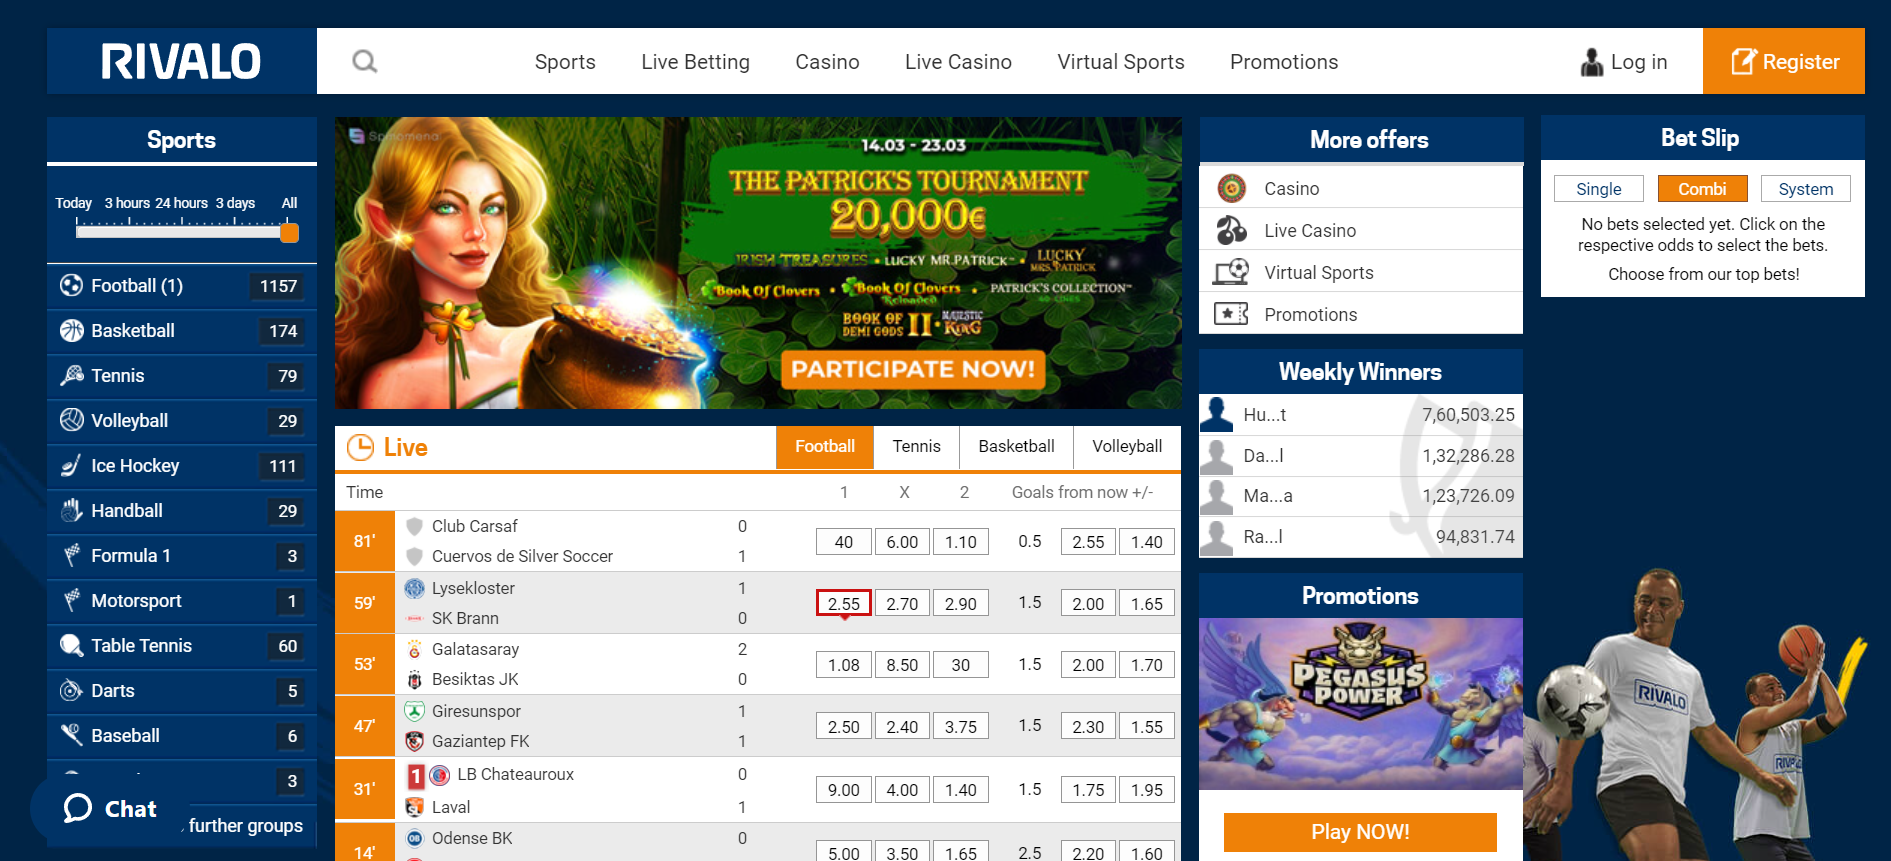 The sports betting site Rivalo features options to participate in tournaments, sports betting, and promotions as well.